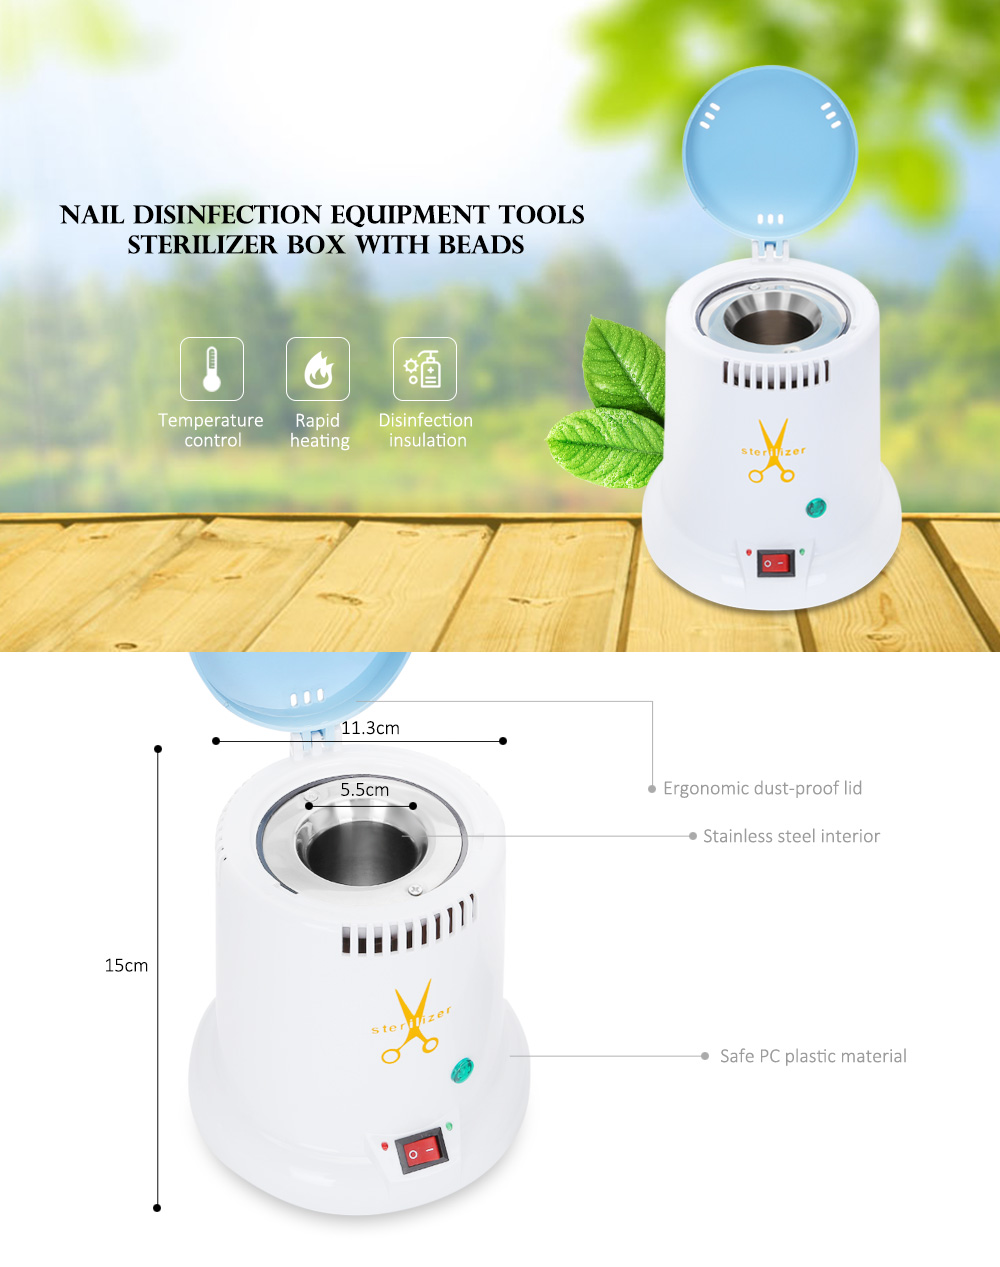 High Temperature Disinfection Nail Equipment Machine Sterilizer Box Tools for Nipper Tweezers